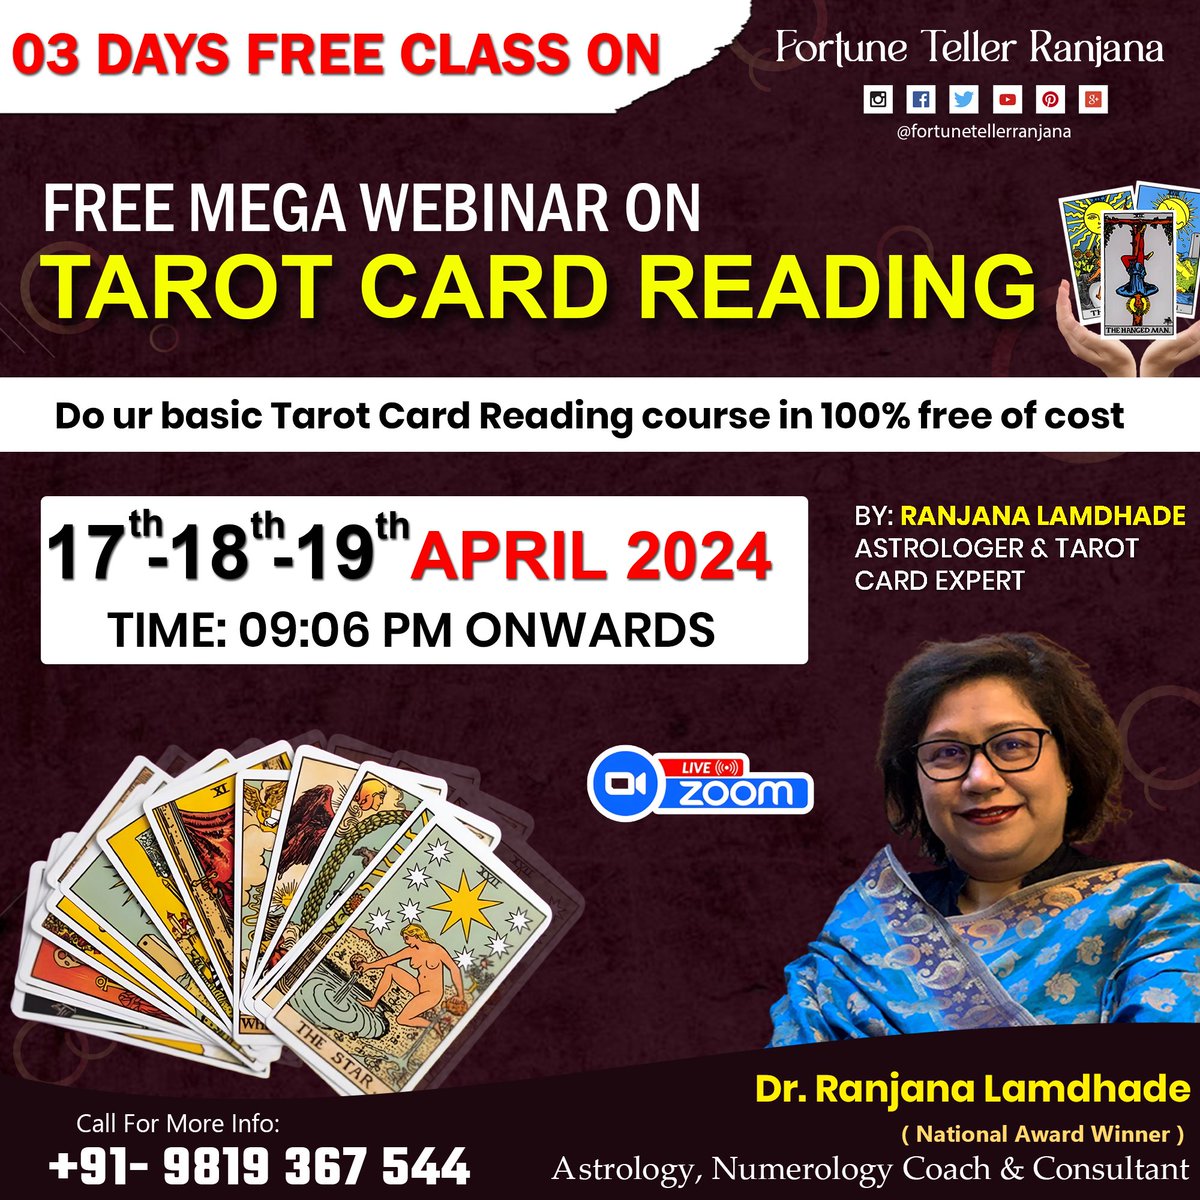 03 DAYS FREE CLASS ON

𝗙𝗥𝗘𝗘 𝗠𝗘𝗚𝗔 𝗪𝗘𝗕𝗜𝗡𝗔𝗥 𝗢𝗡
𝗧𝗔𝗥𝗢𝗧 𝗖𝗔𝗥𝗗 𝗥𝗘𝗔𝗗𝗜𝗡𝗚

Do ur basic Tarot Card Reading course in 100% free of cost
.
.
.
#fortunetellerranjana #drranjnalamdhade #TarotCardReading #FreeClass #TarotInsights #IntuitiveWisdom #Divination